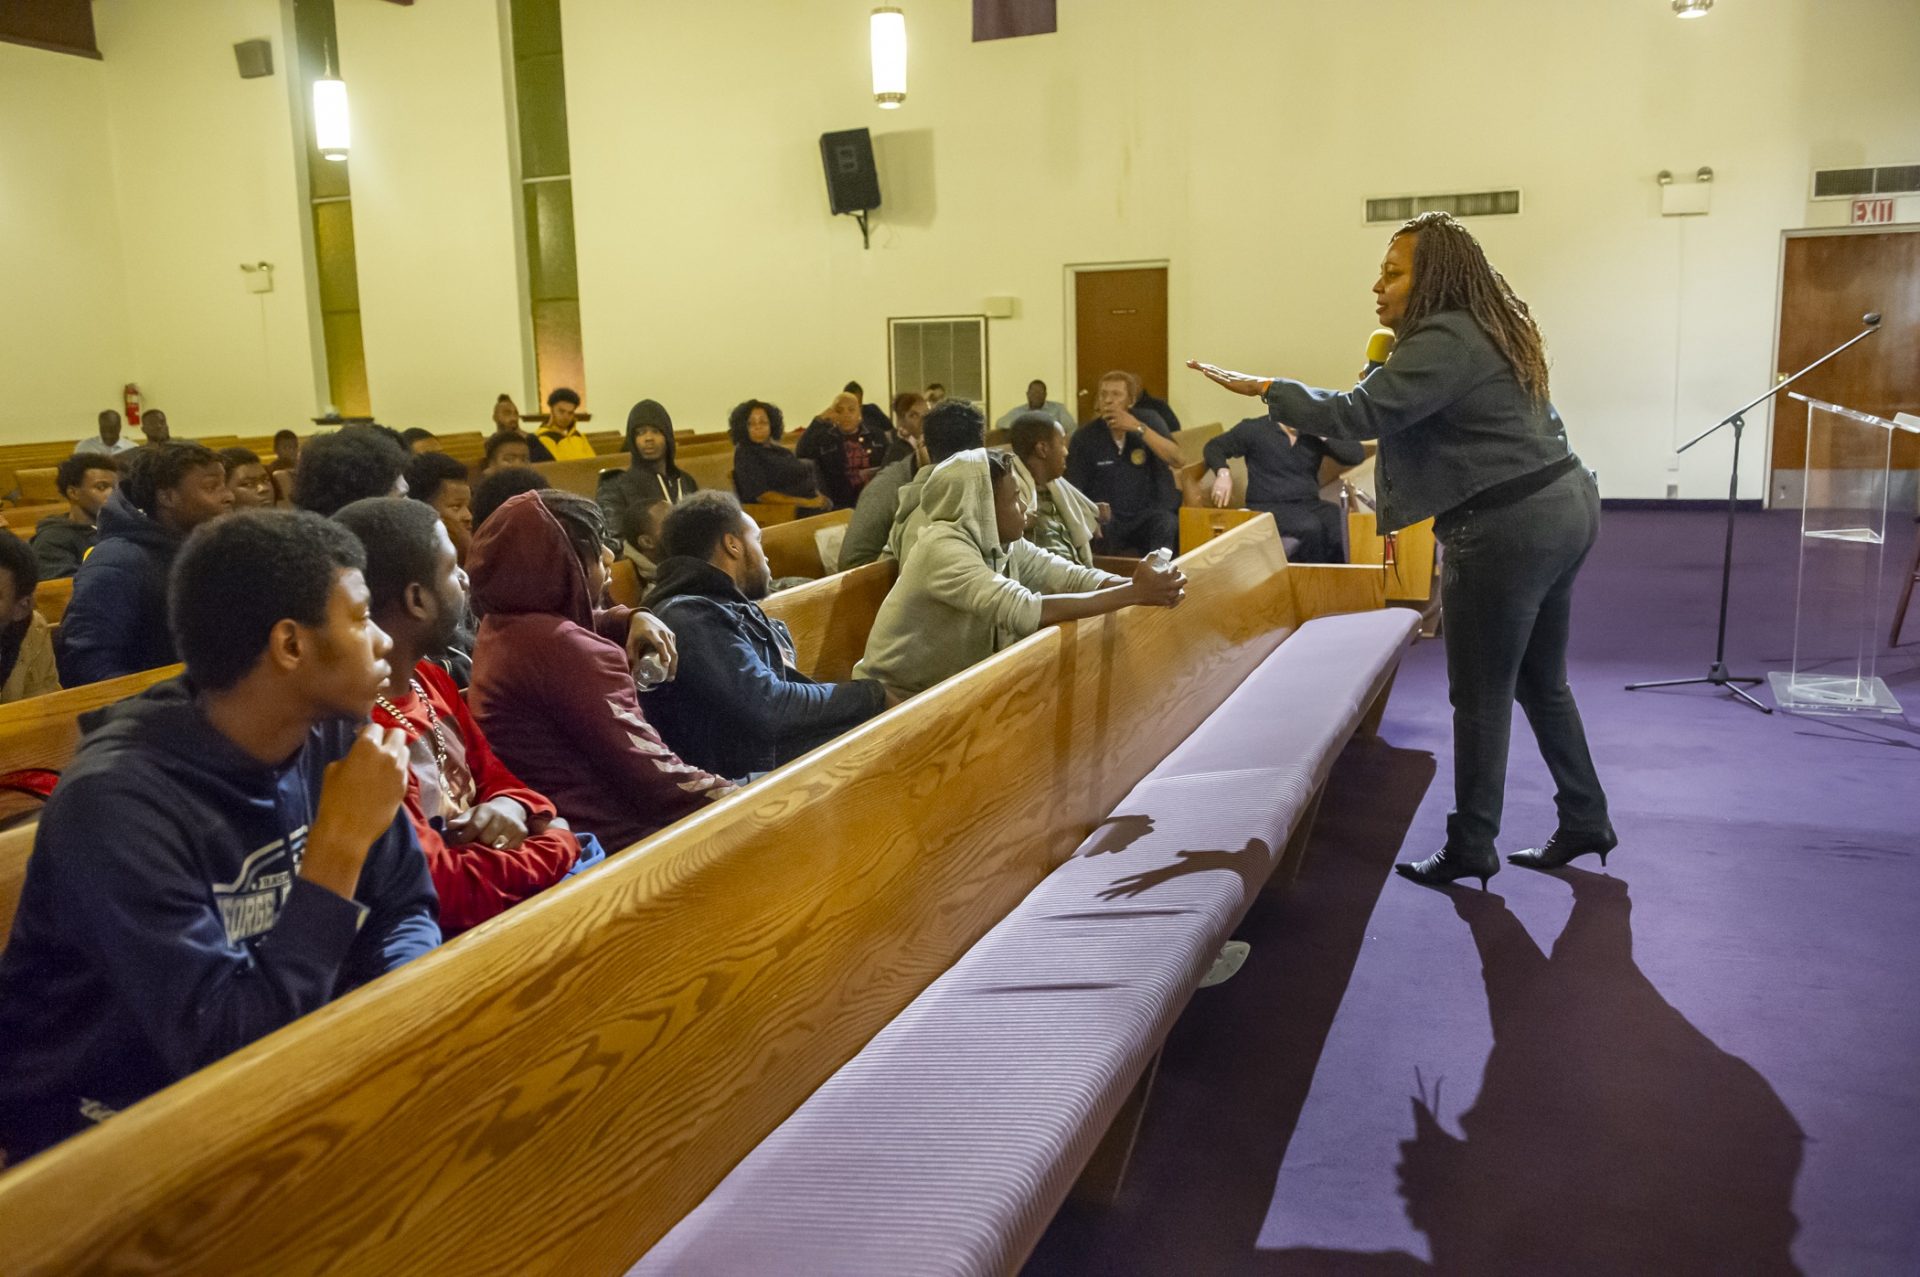 Guardian Civic League President and Philadelphia Sherriff Rochelle Bilal explains to a young audience on best practices for encounters with police officers when they are stopped for questioning.